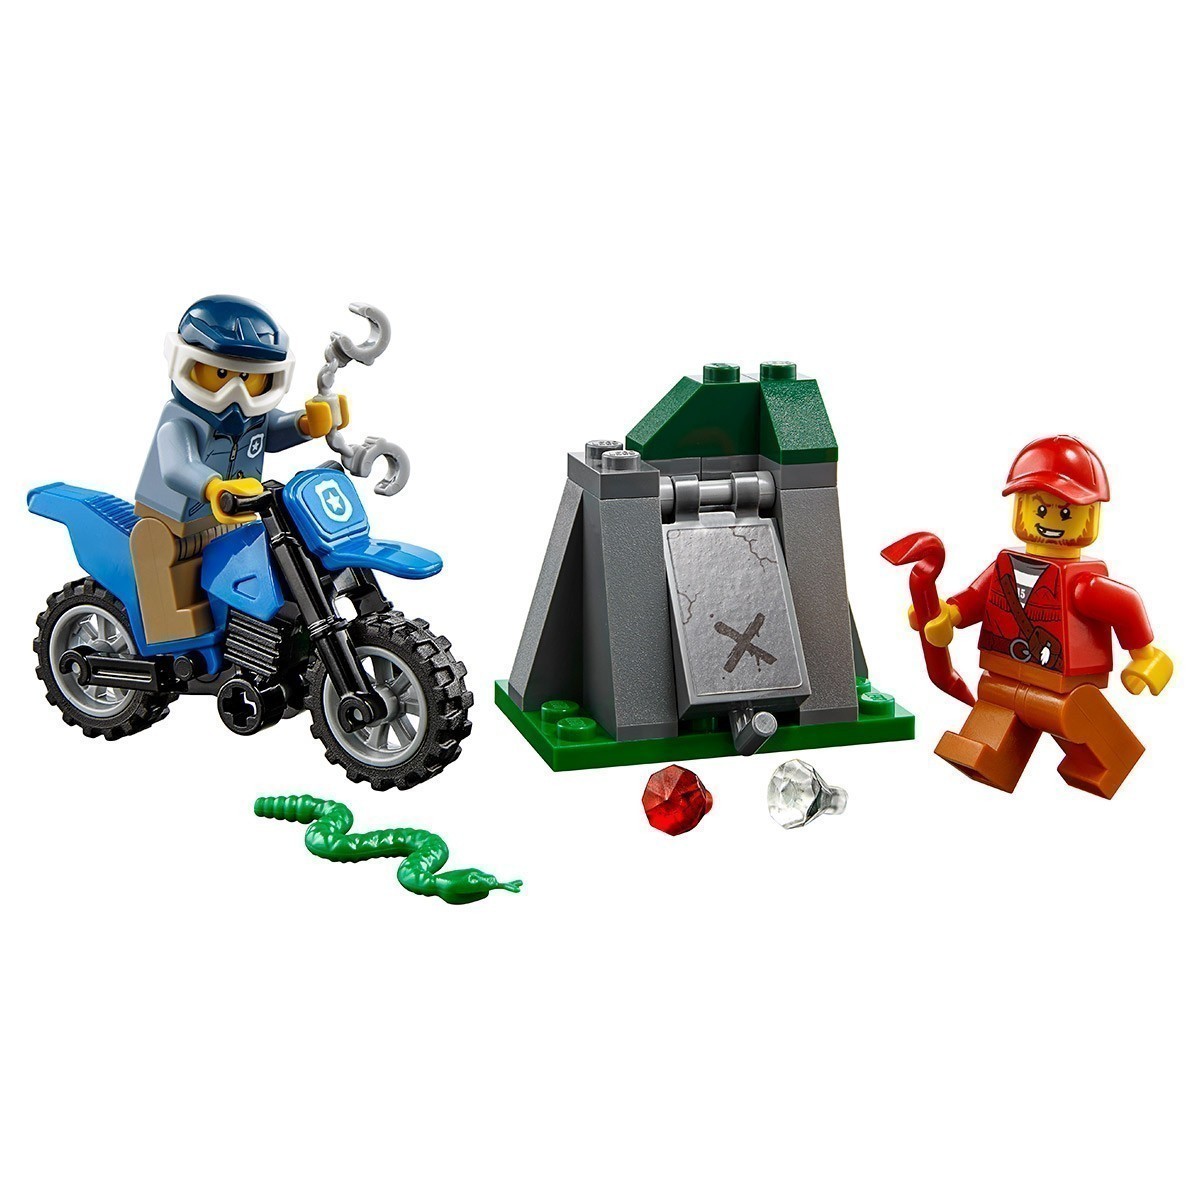 LEGO® City - 60170 Off-Road Chase